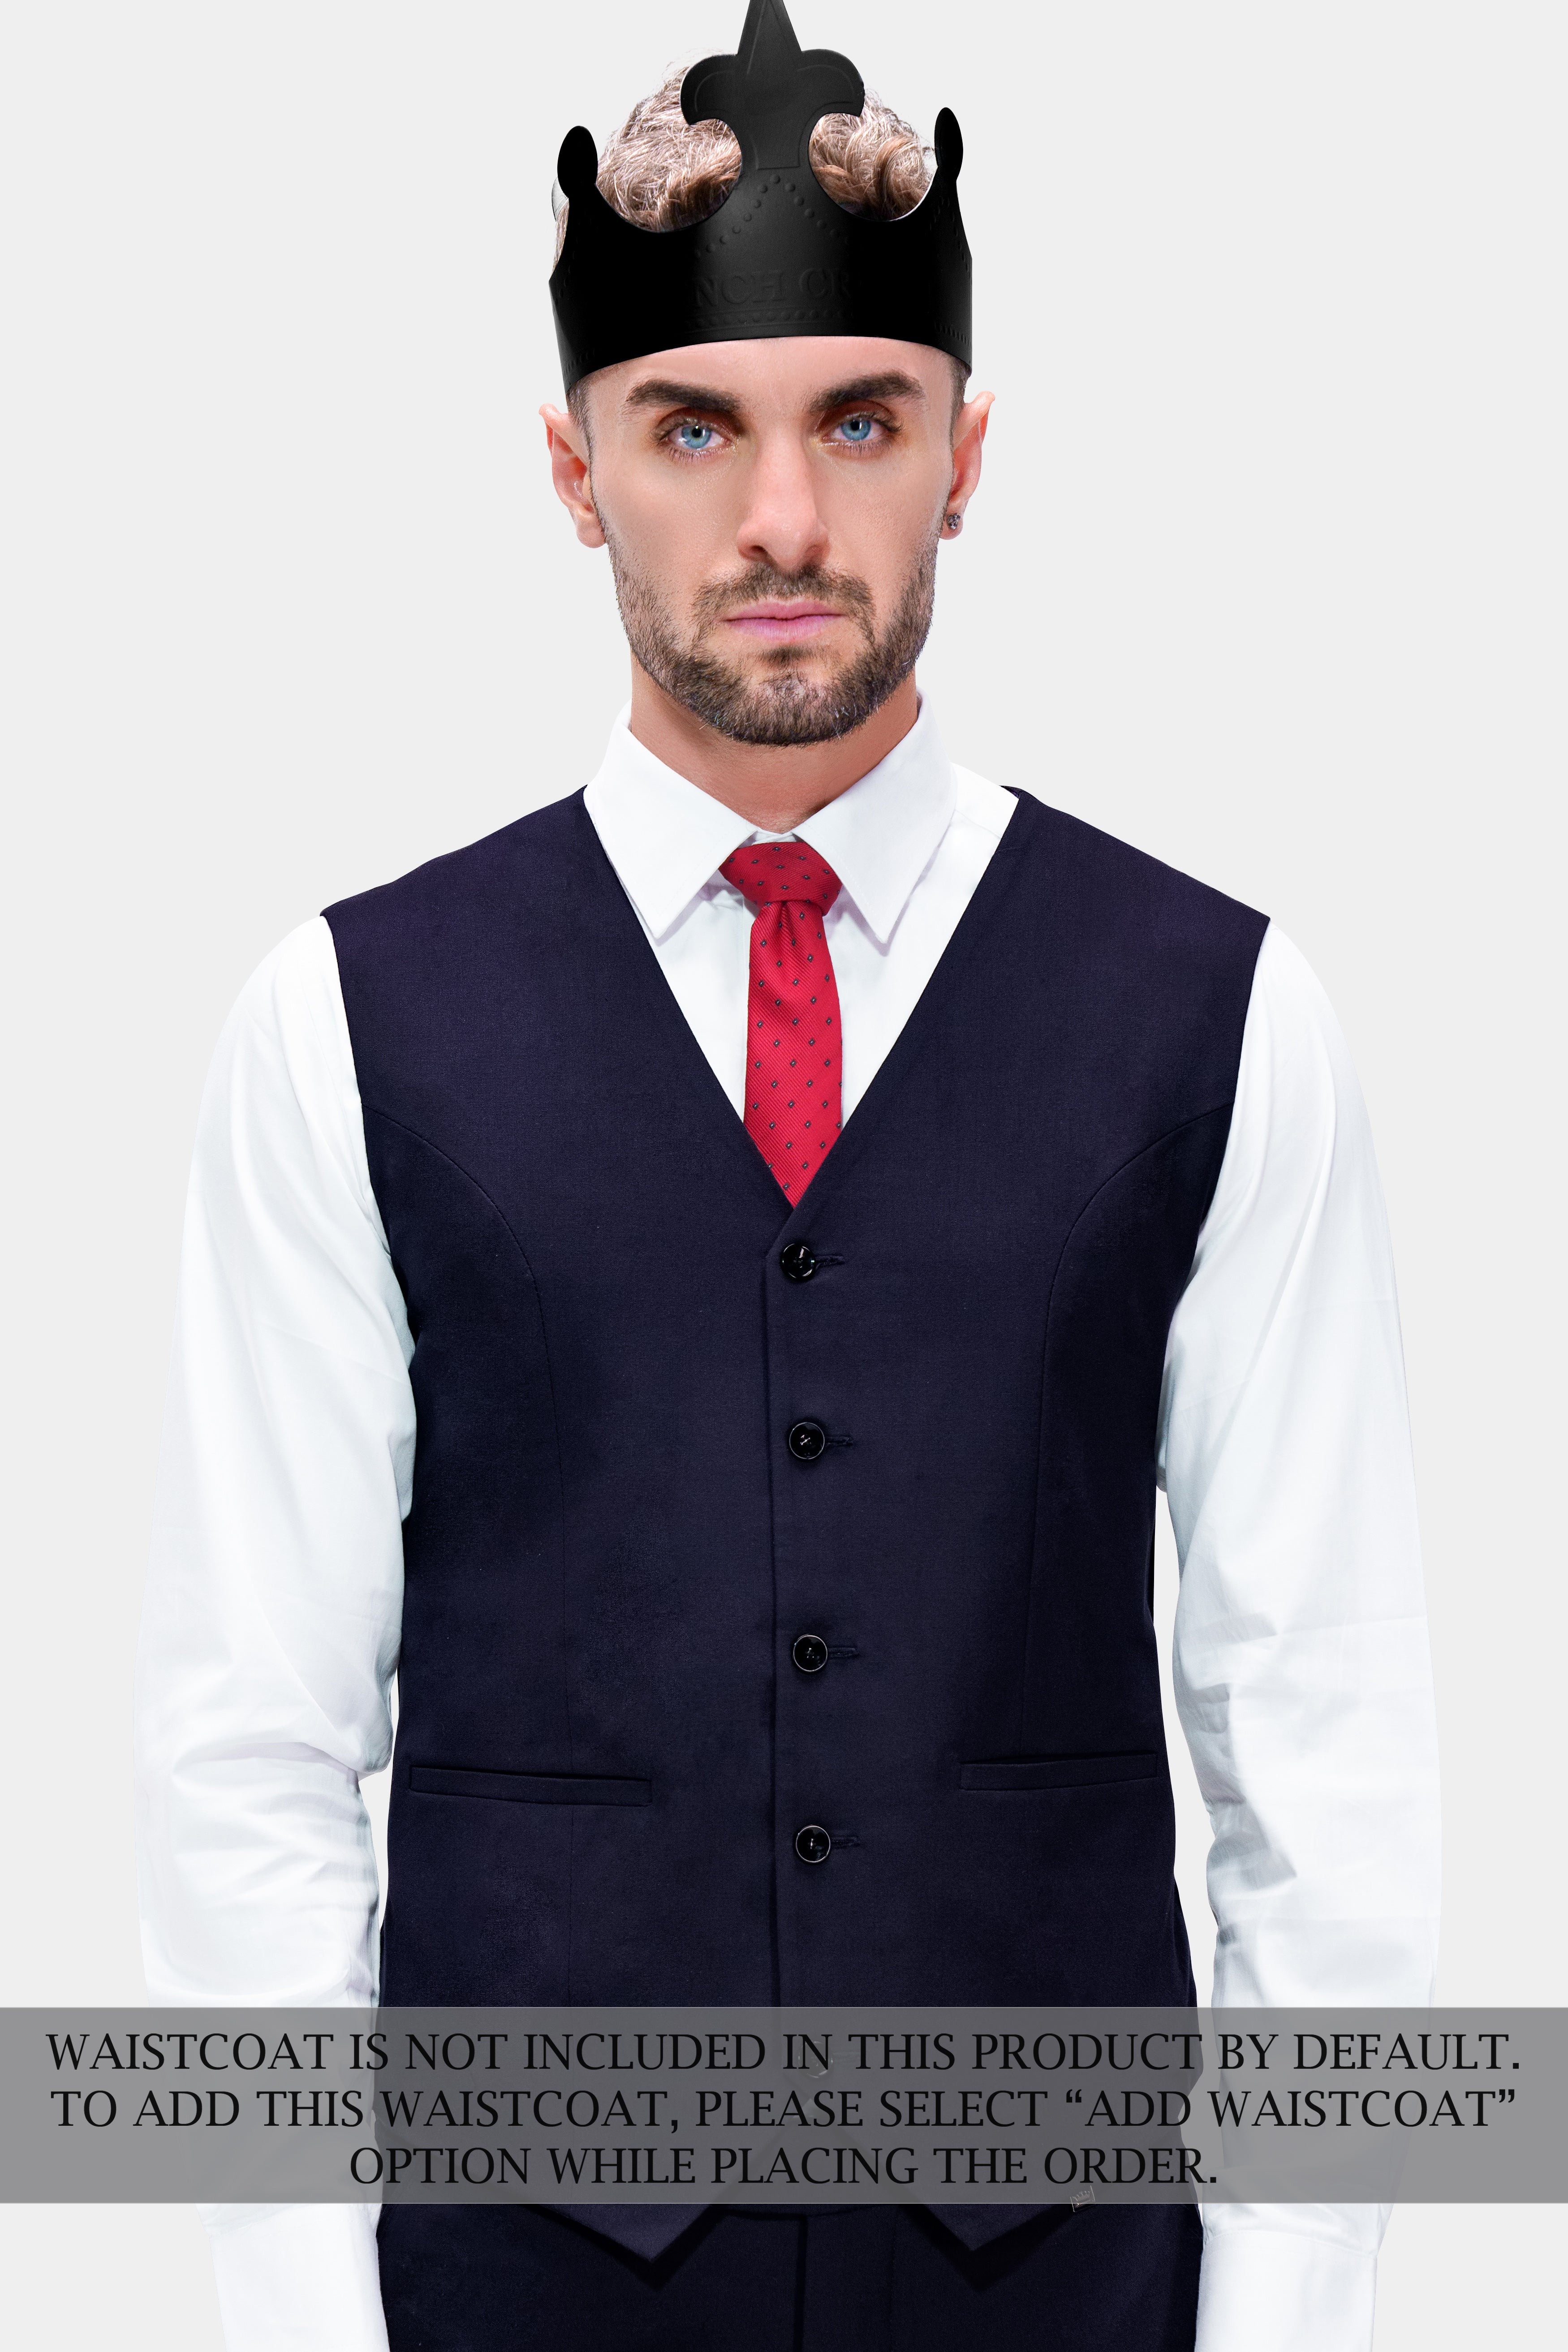 Bleached Cedar Blue Stretchable Wool rich Double Breasted traveler Suit ST2758-DB-36, ST2758-DB-38, ST2758-DB-40, ST2758-DB-42, ST2758-DB-44, ST2758-DB-46, ST2758-DB-48, ST2758-DB-50, ST2758-DB-52, ST2758-DB-54, ST2758-DB-56, ST2758-DB-58, ST2758-DB-60